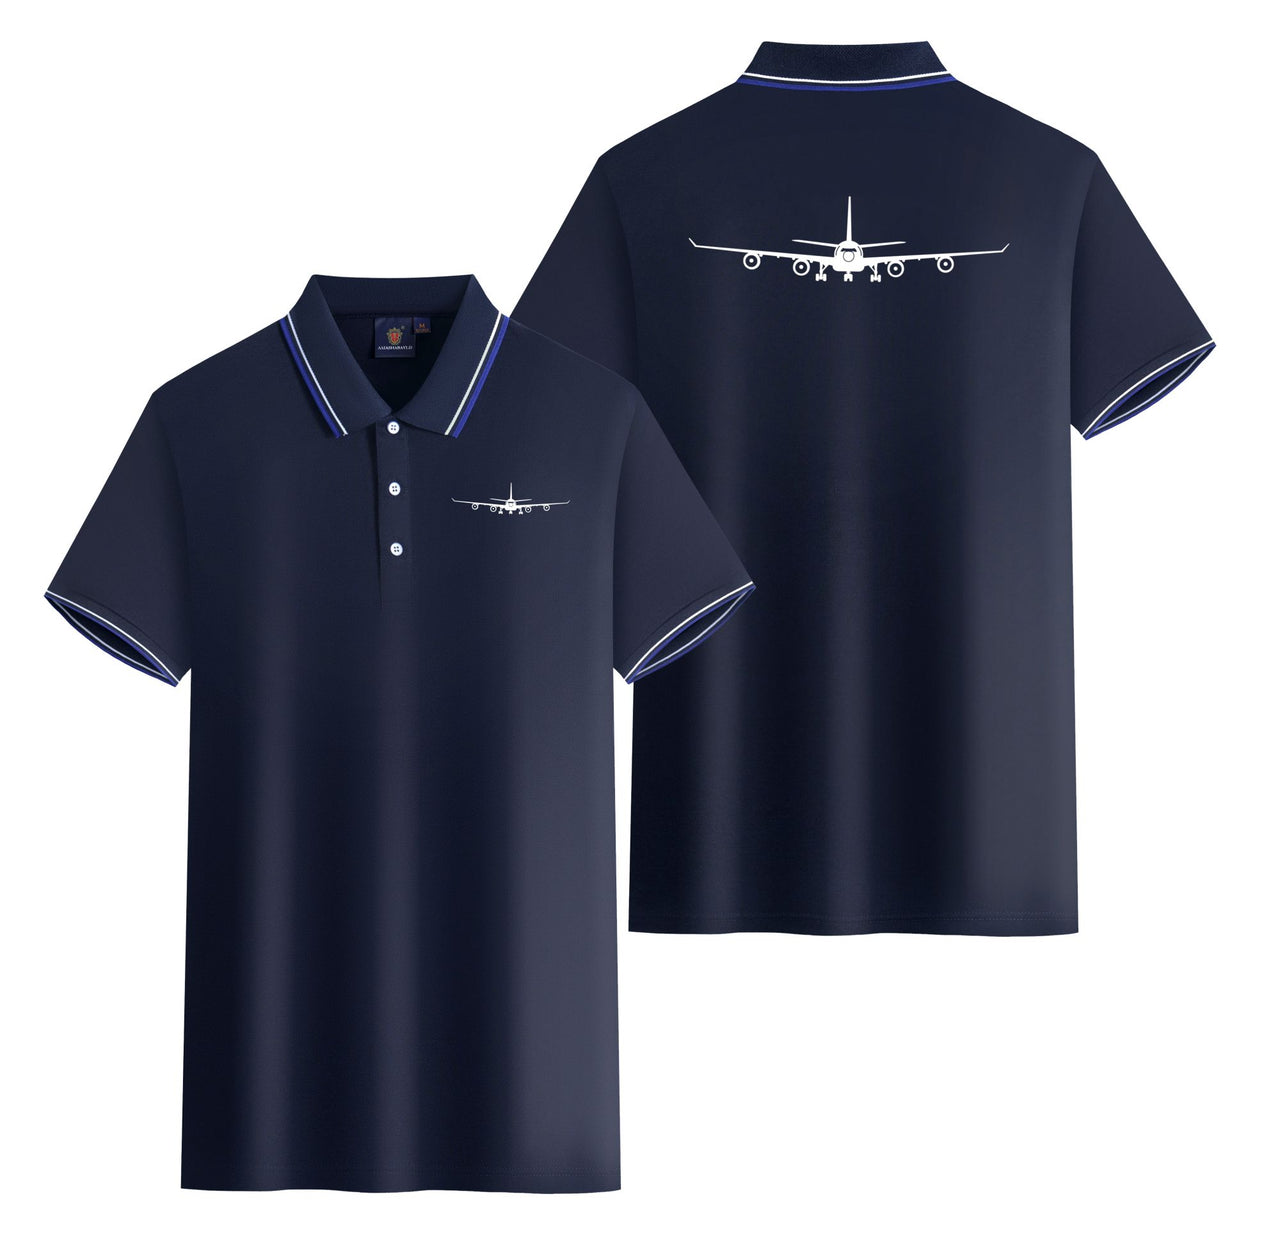 Airbus A340 Silhouette Designed Stylish Polo T-Shirts (Double-Side)